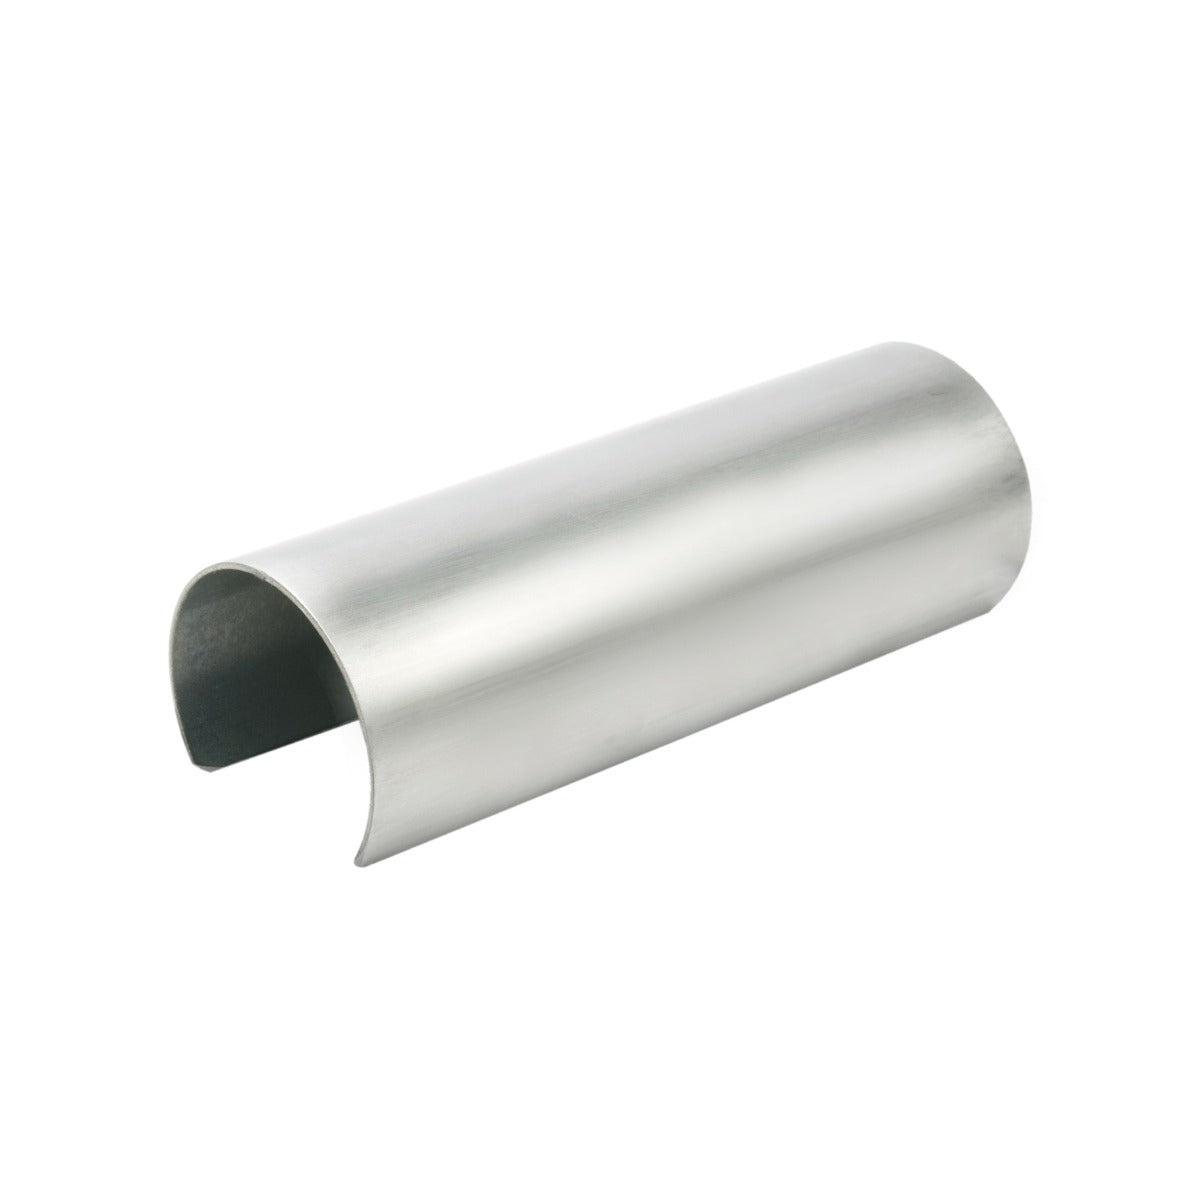 Connector Sleeves - Mill Aluminum